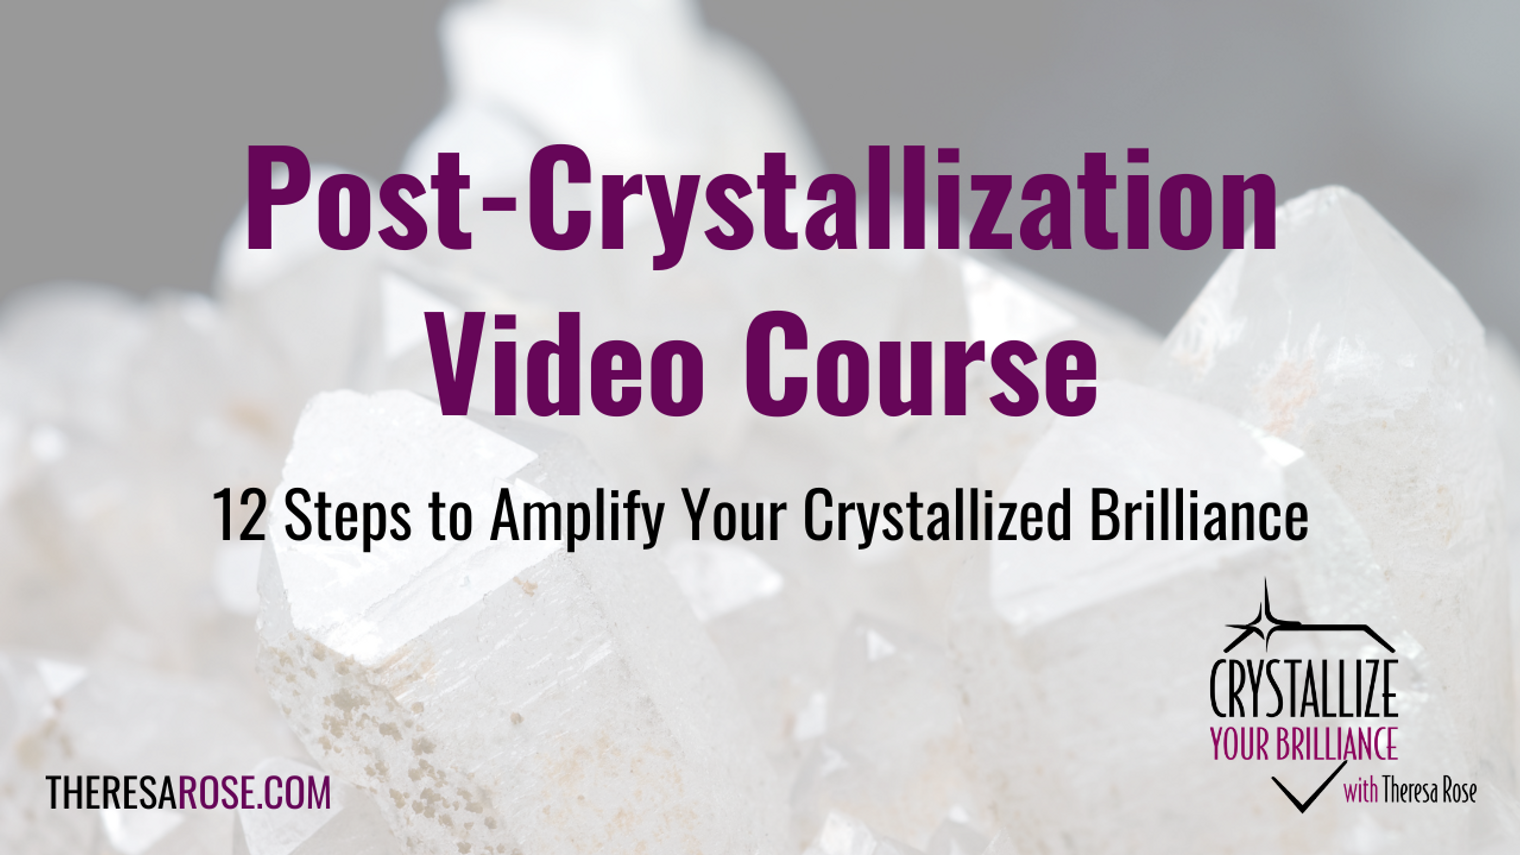 Post-Crystallization Video Course